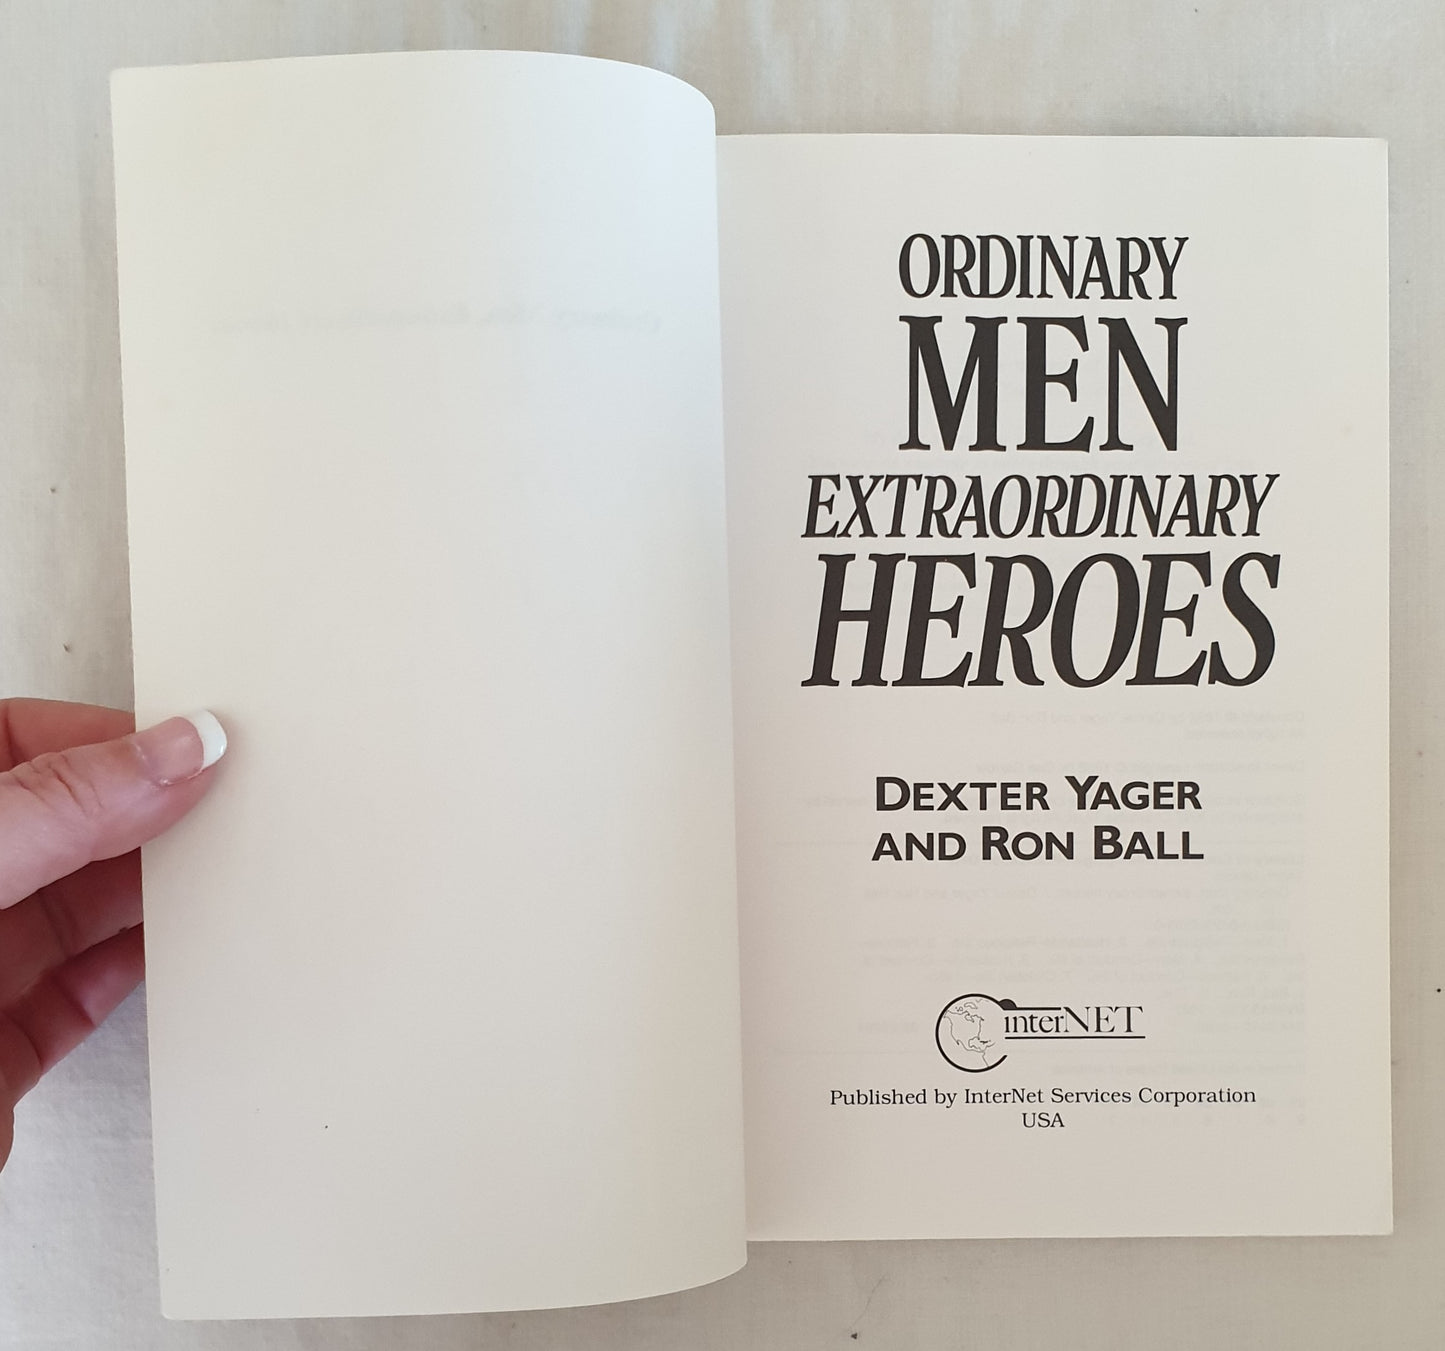 Ordinary Men Extraordinary Heroes by Dexter Yager and Ron Ball